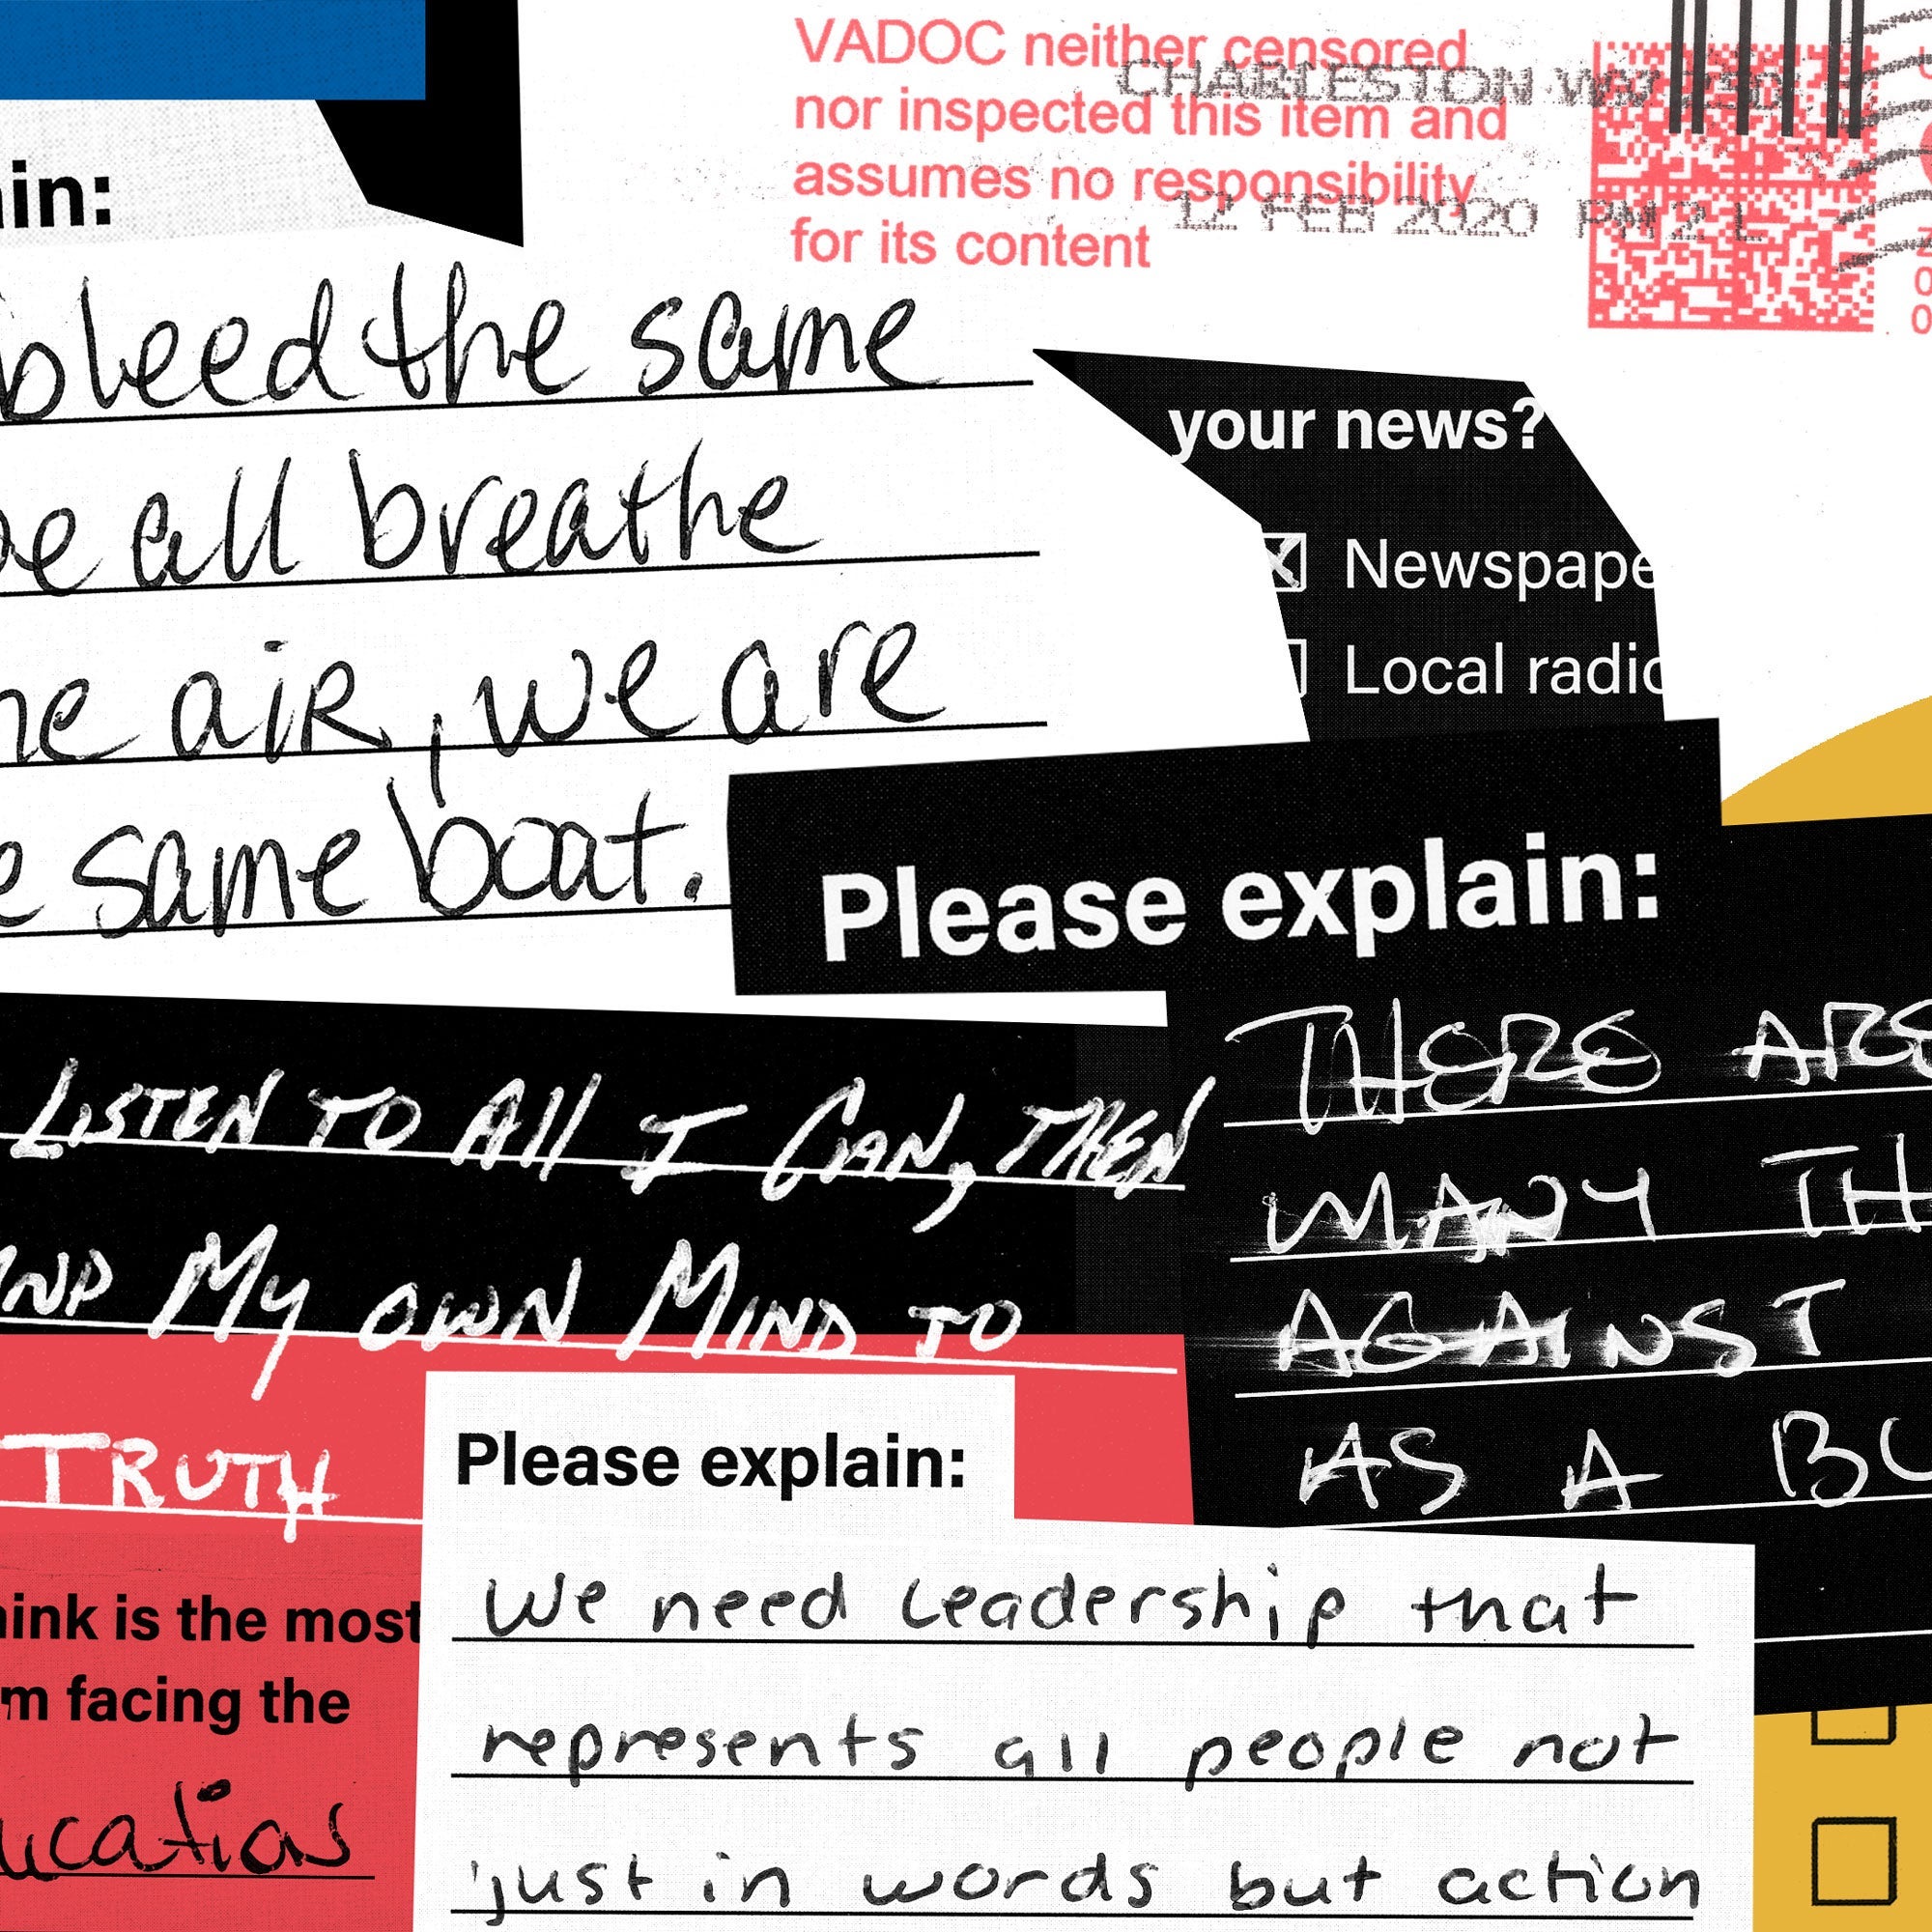 Handwritten responses in a collage.